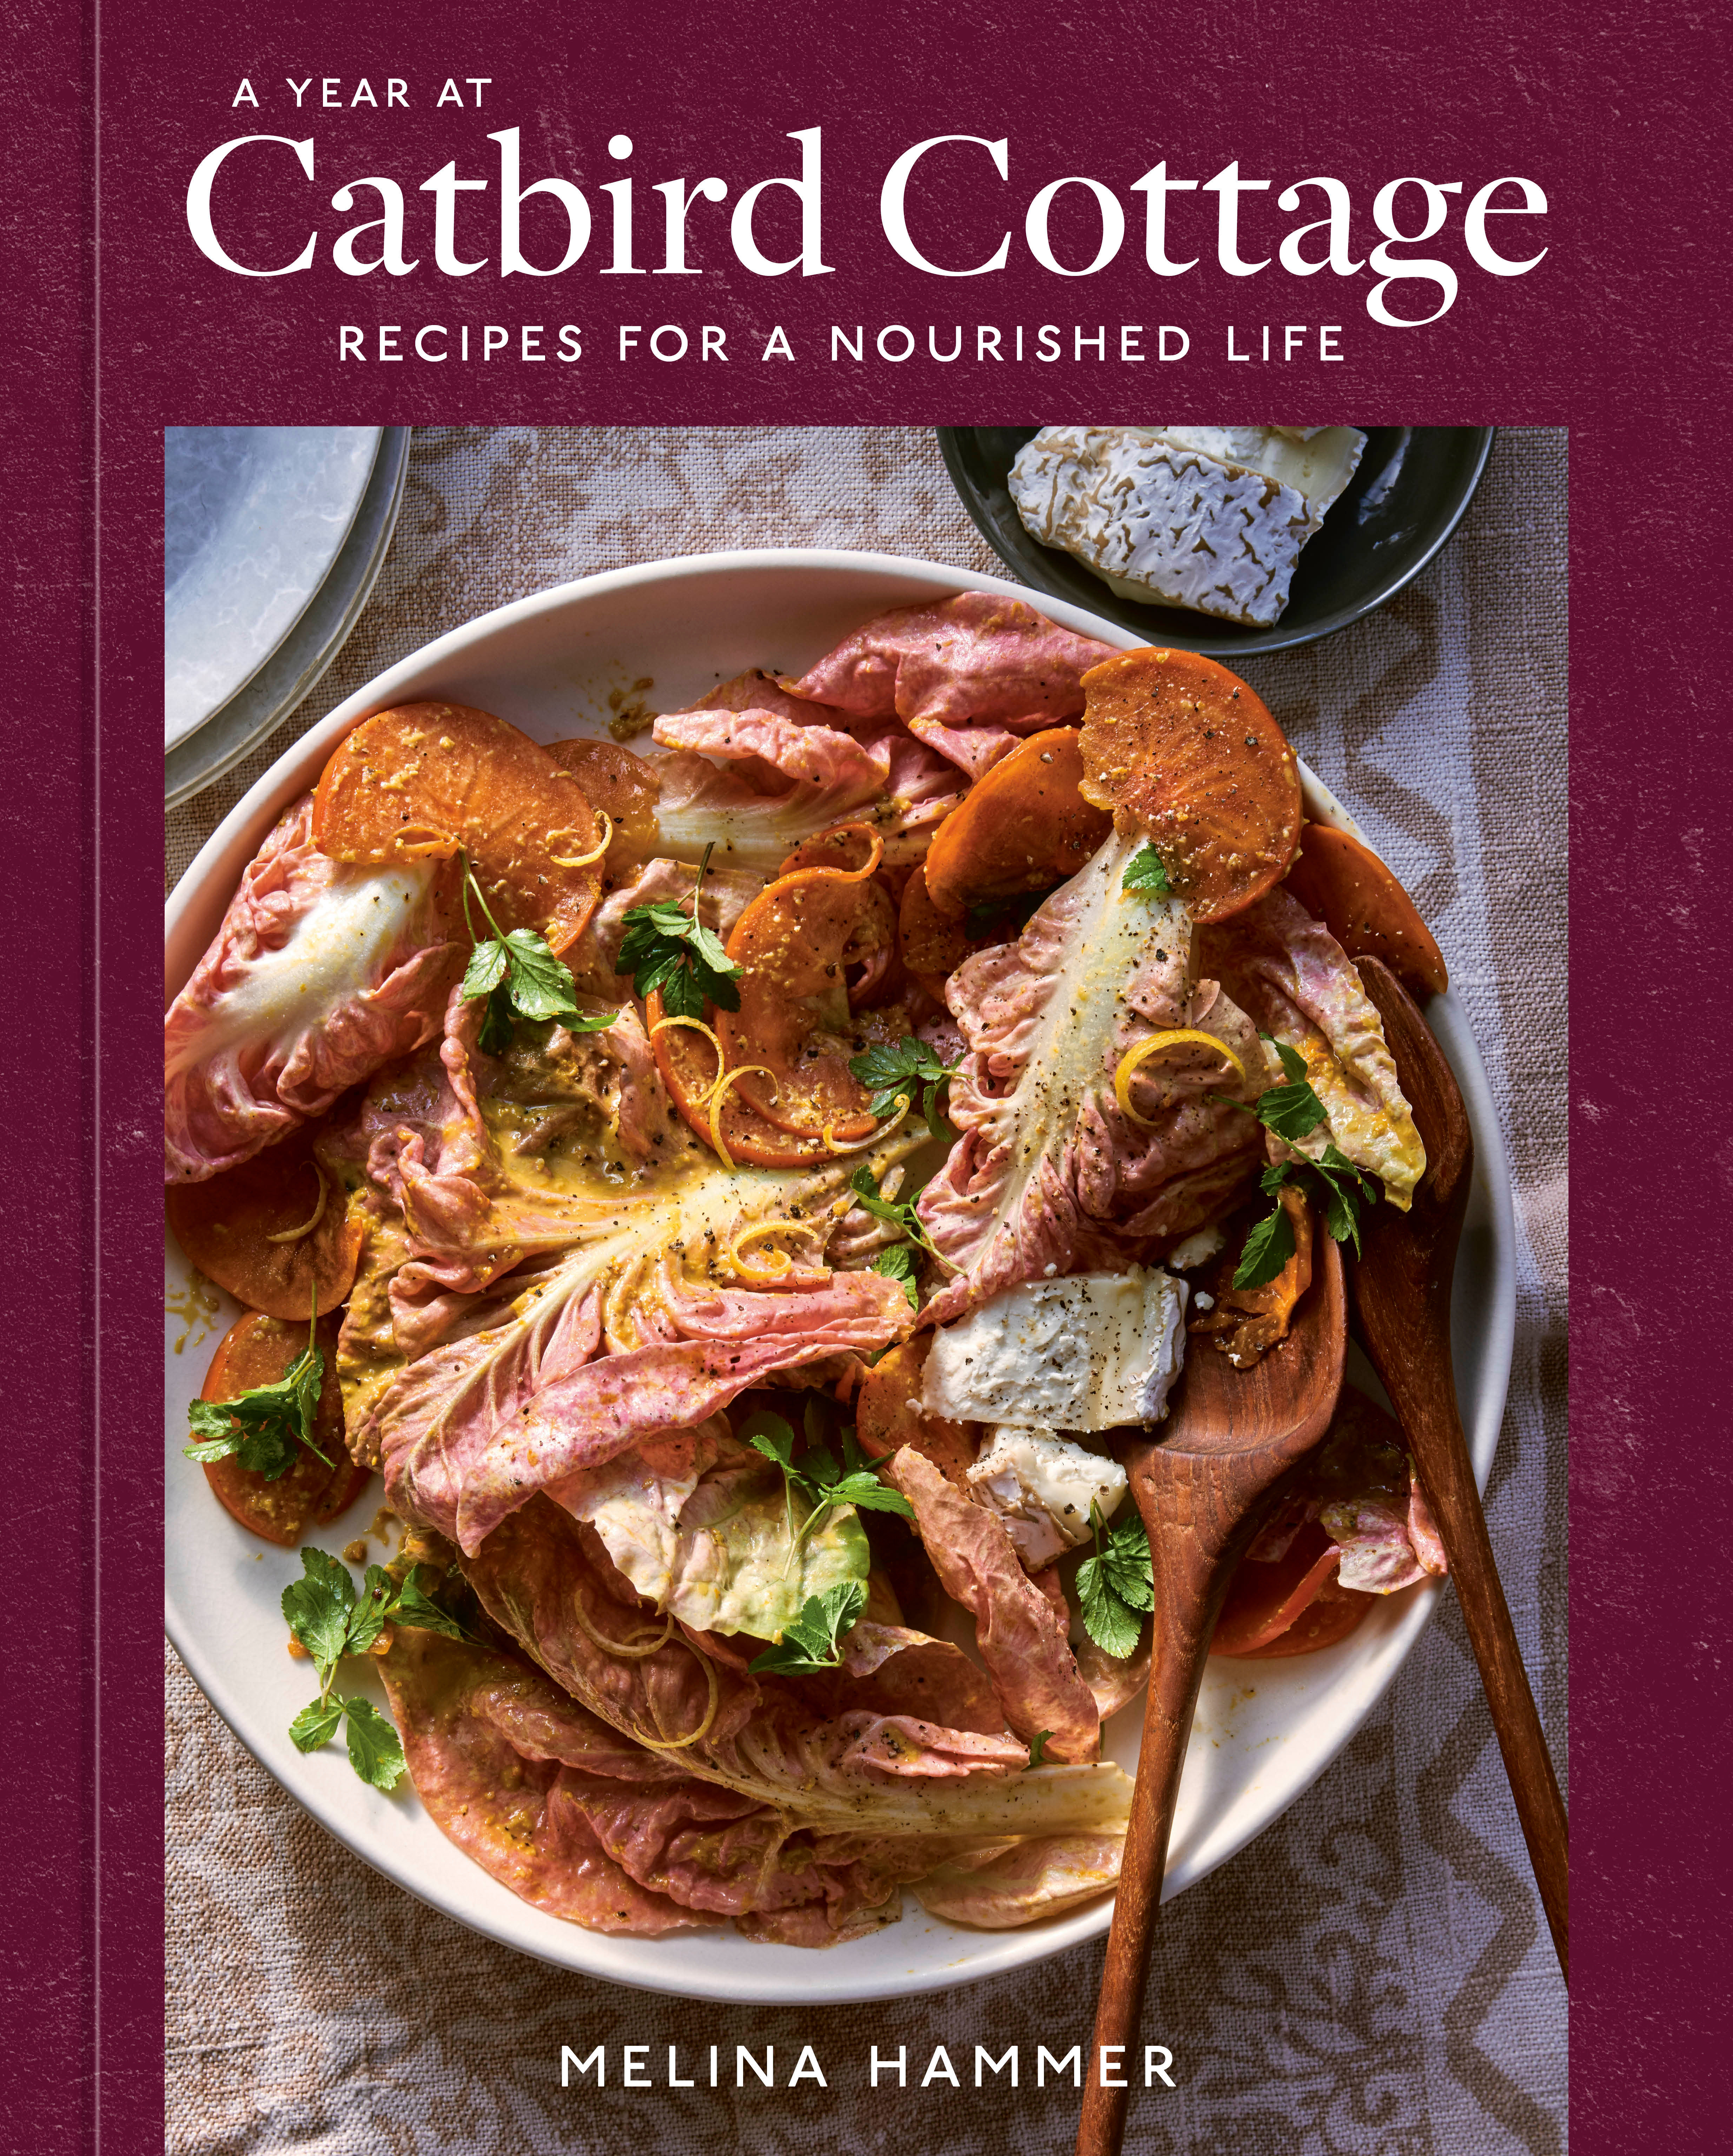 A Year At Catbird Cottage (Hardcover Book)